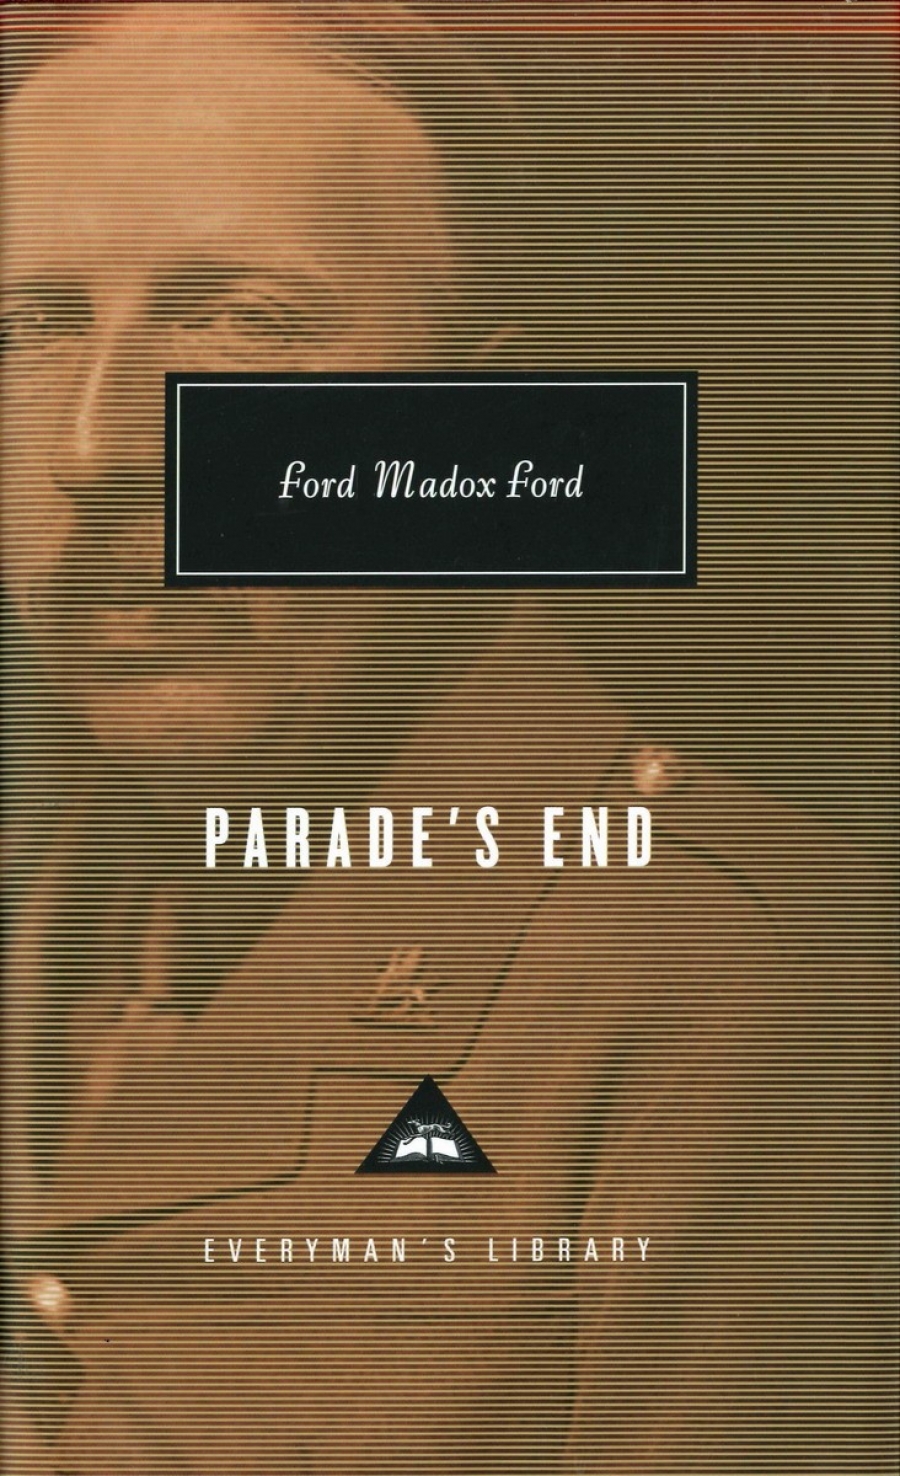 Ford, Ford Madox Parade's end 